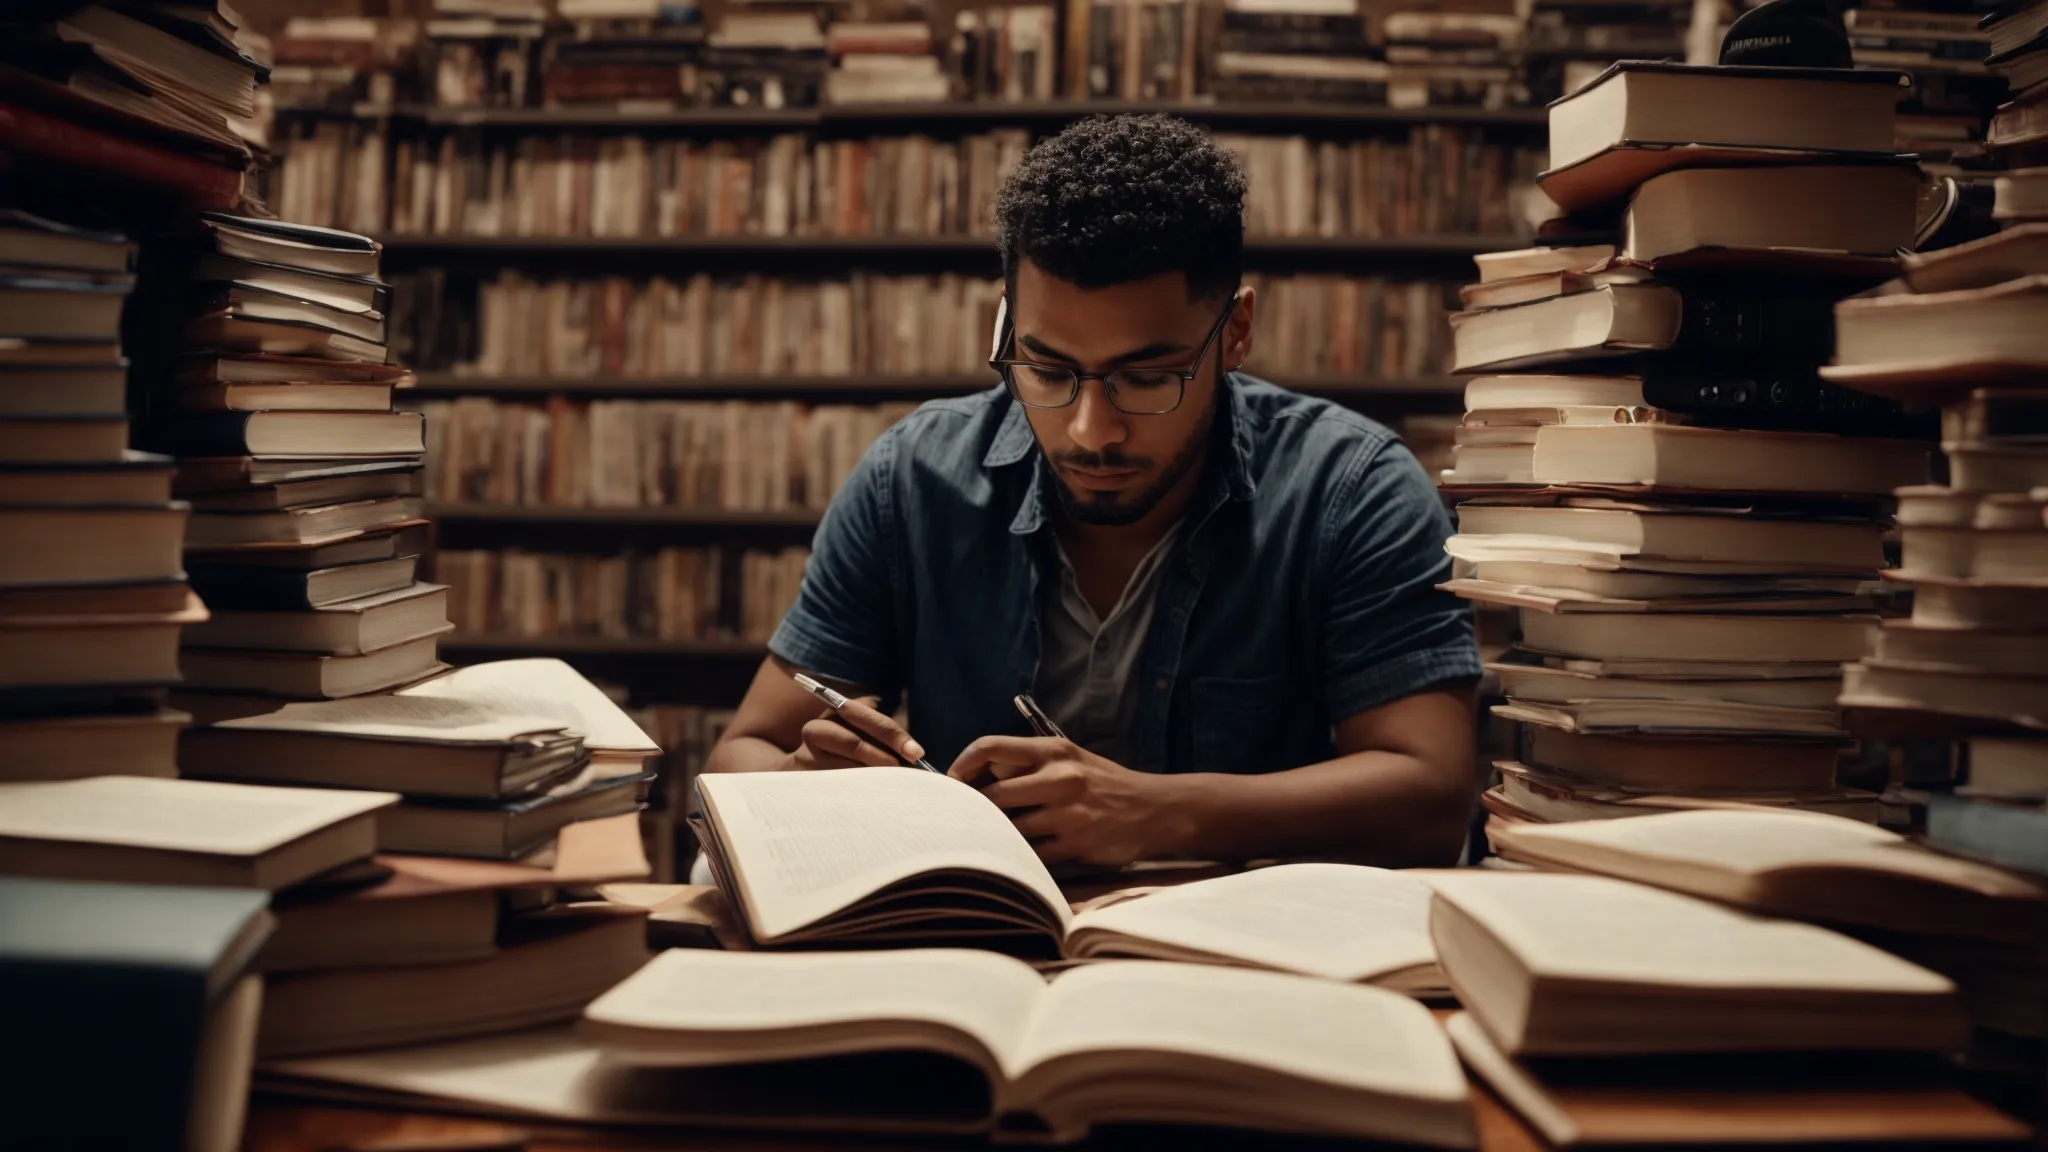 a focused individual sits before a laptop, surrounded by books and notes, brainstorming ideas.